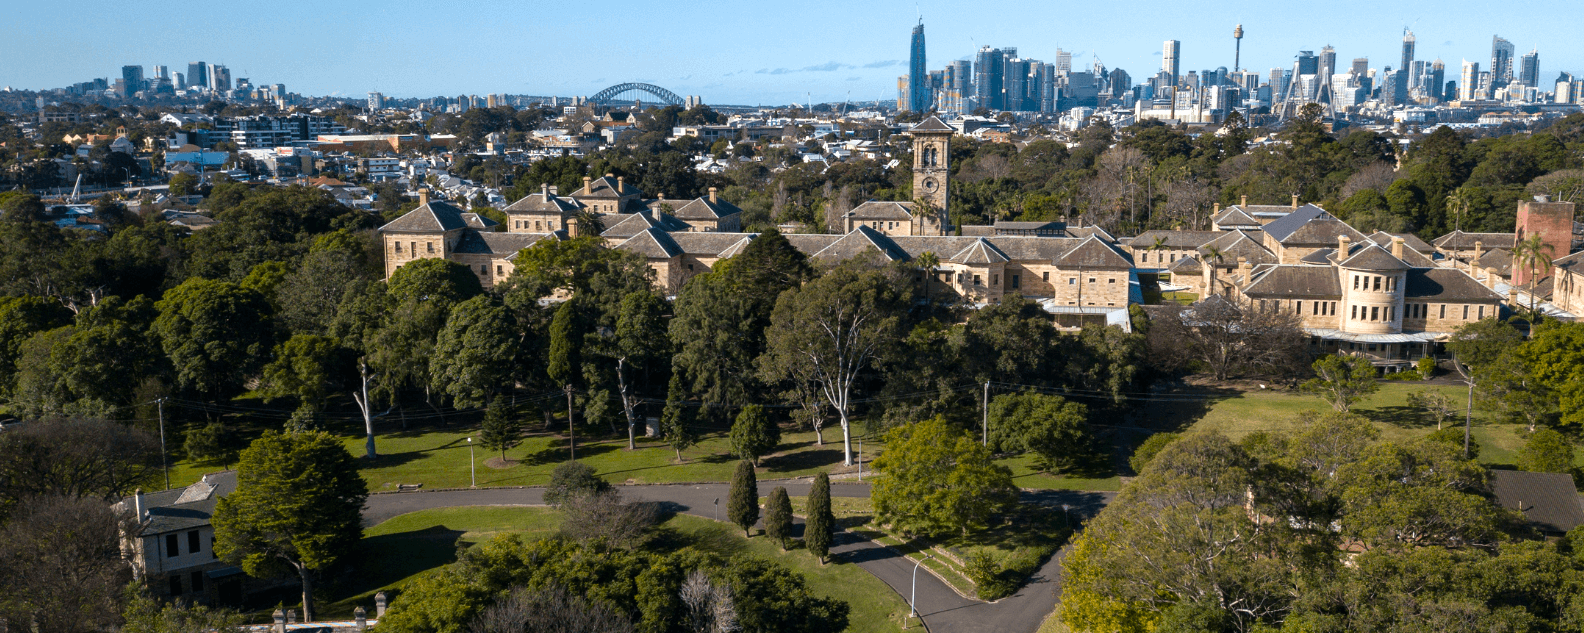 An aerial view over Callan Park with the Kirkbride building in the foreground, and Sydney city skyline in the background.